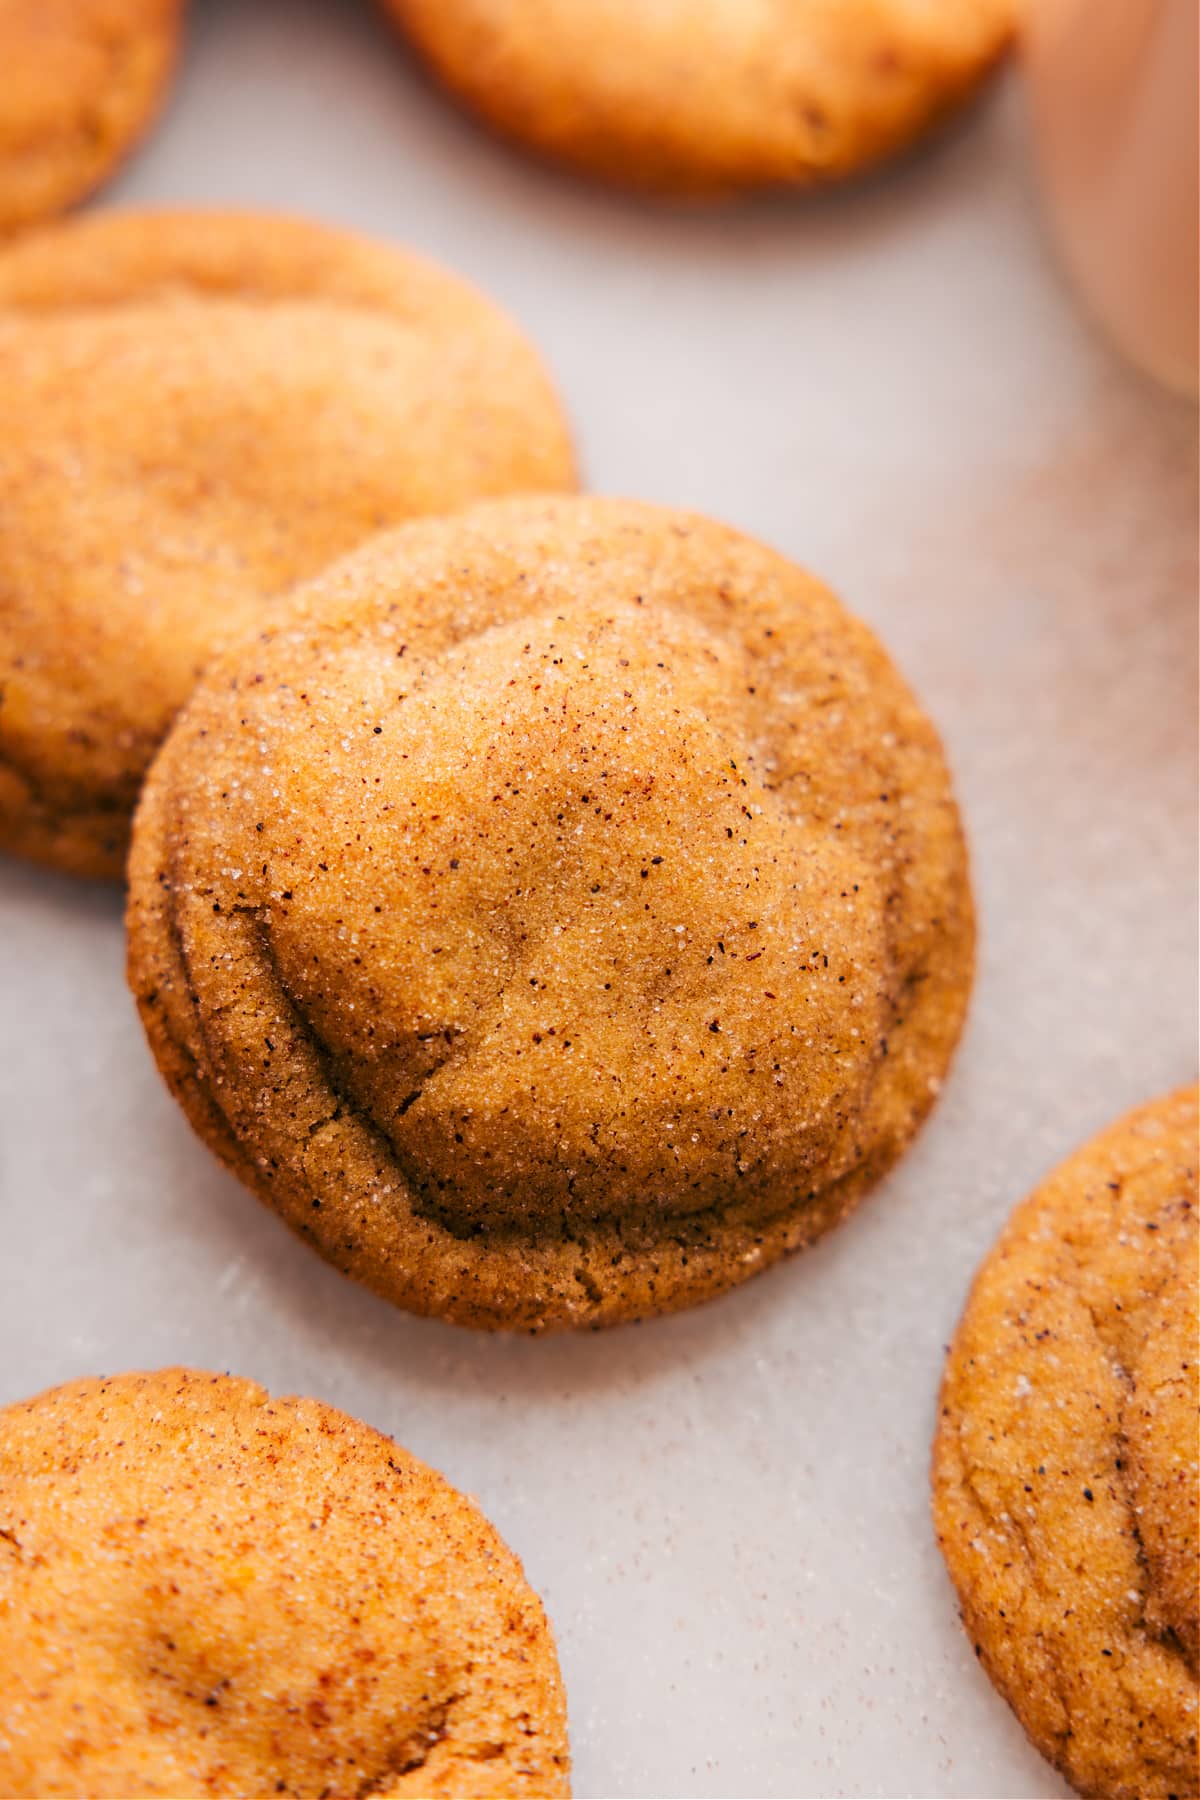 Finished pumpkin snickerdoodles, warm and fluffy, ready to be enjoyed.